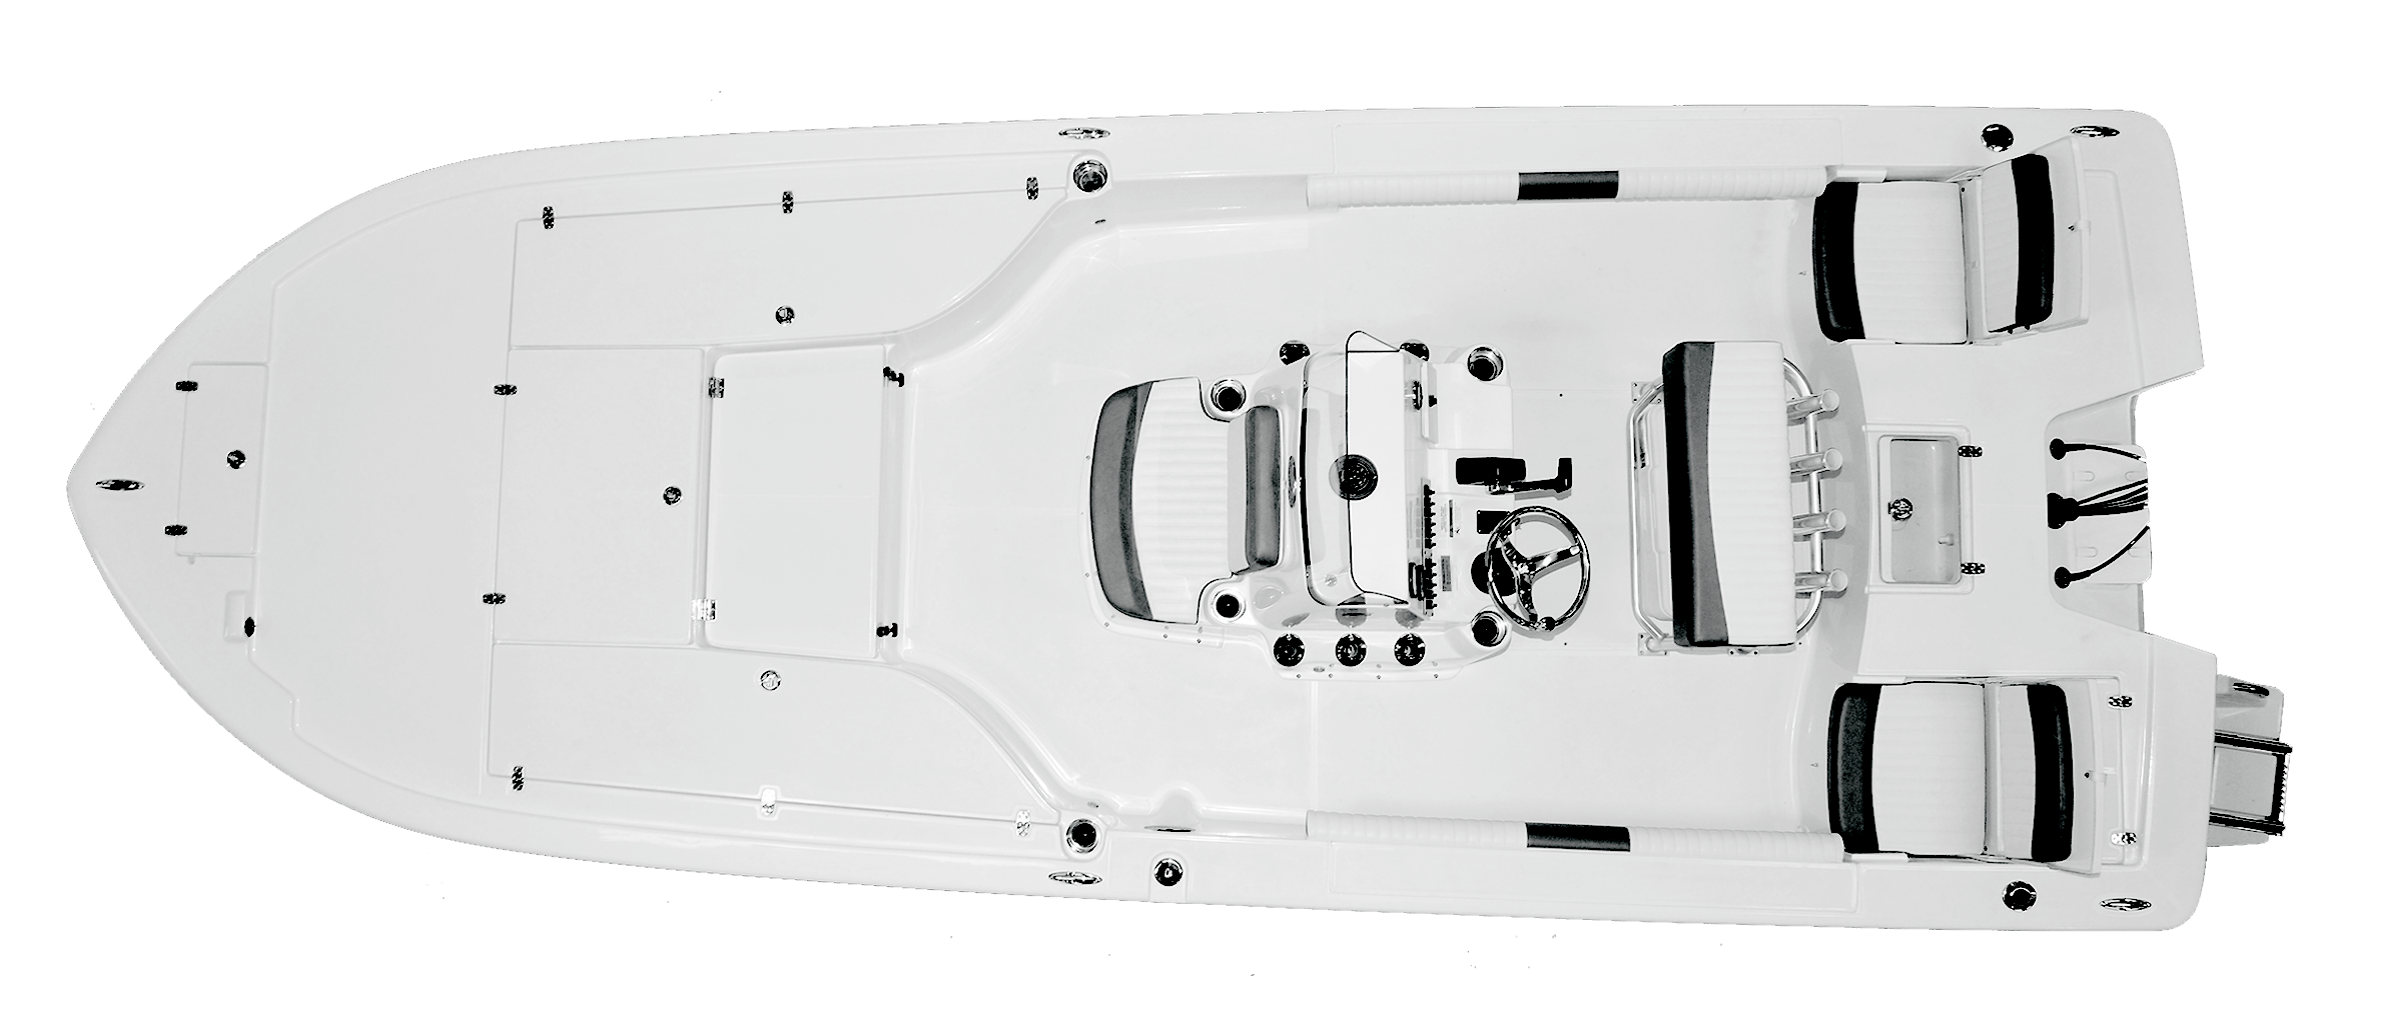 FX24 Bay Boat Top View